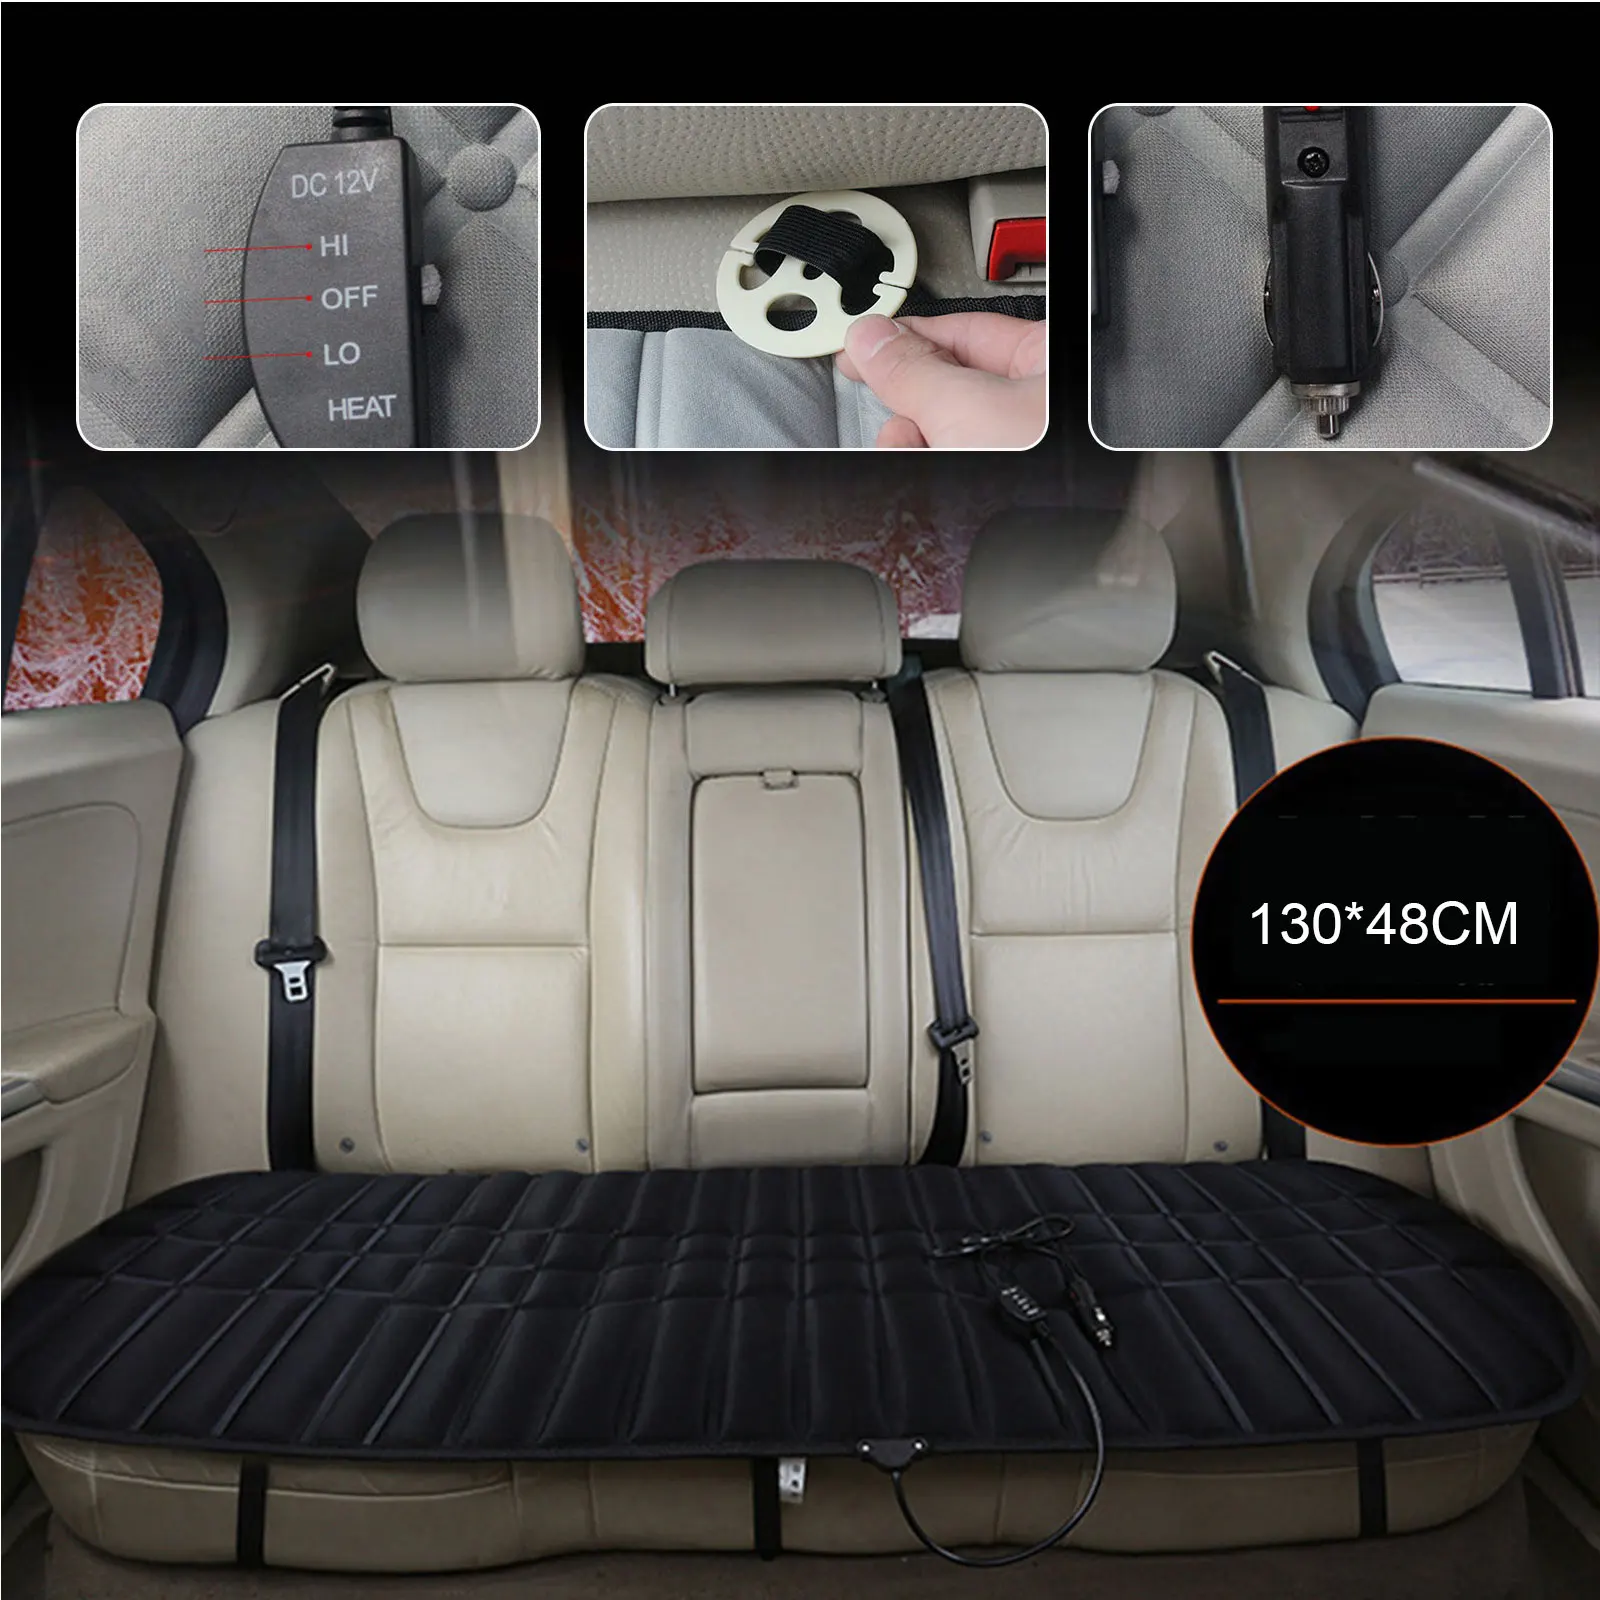 

12V Car Rear Back Heated Heating Seat Cushion Cover Pad Winter Car Auto Warmer Heater Automotive Accessories 32-42W 35-60°